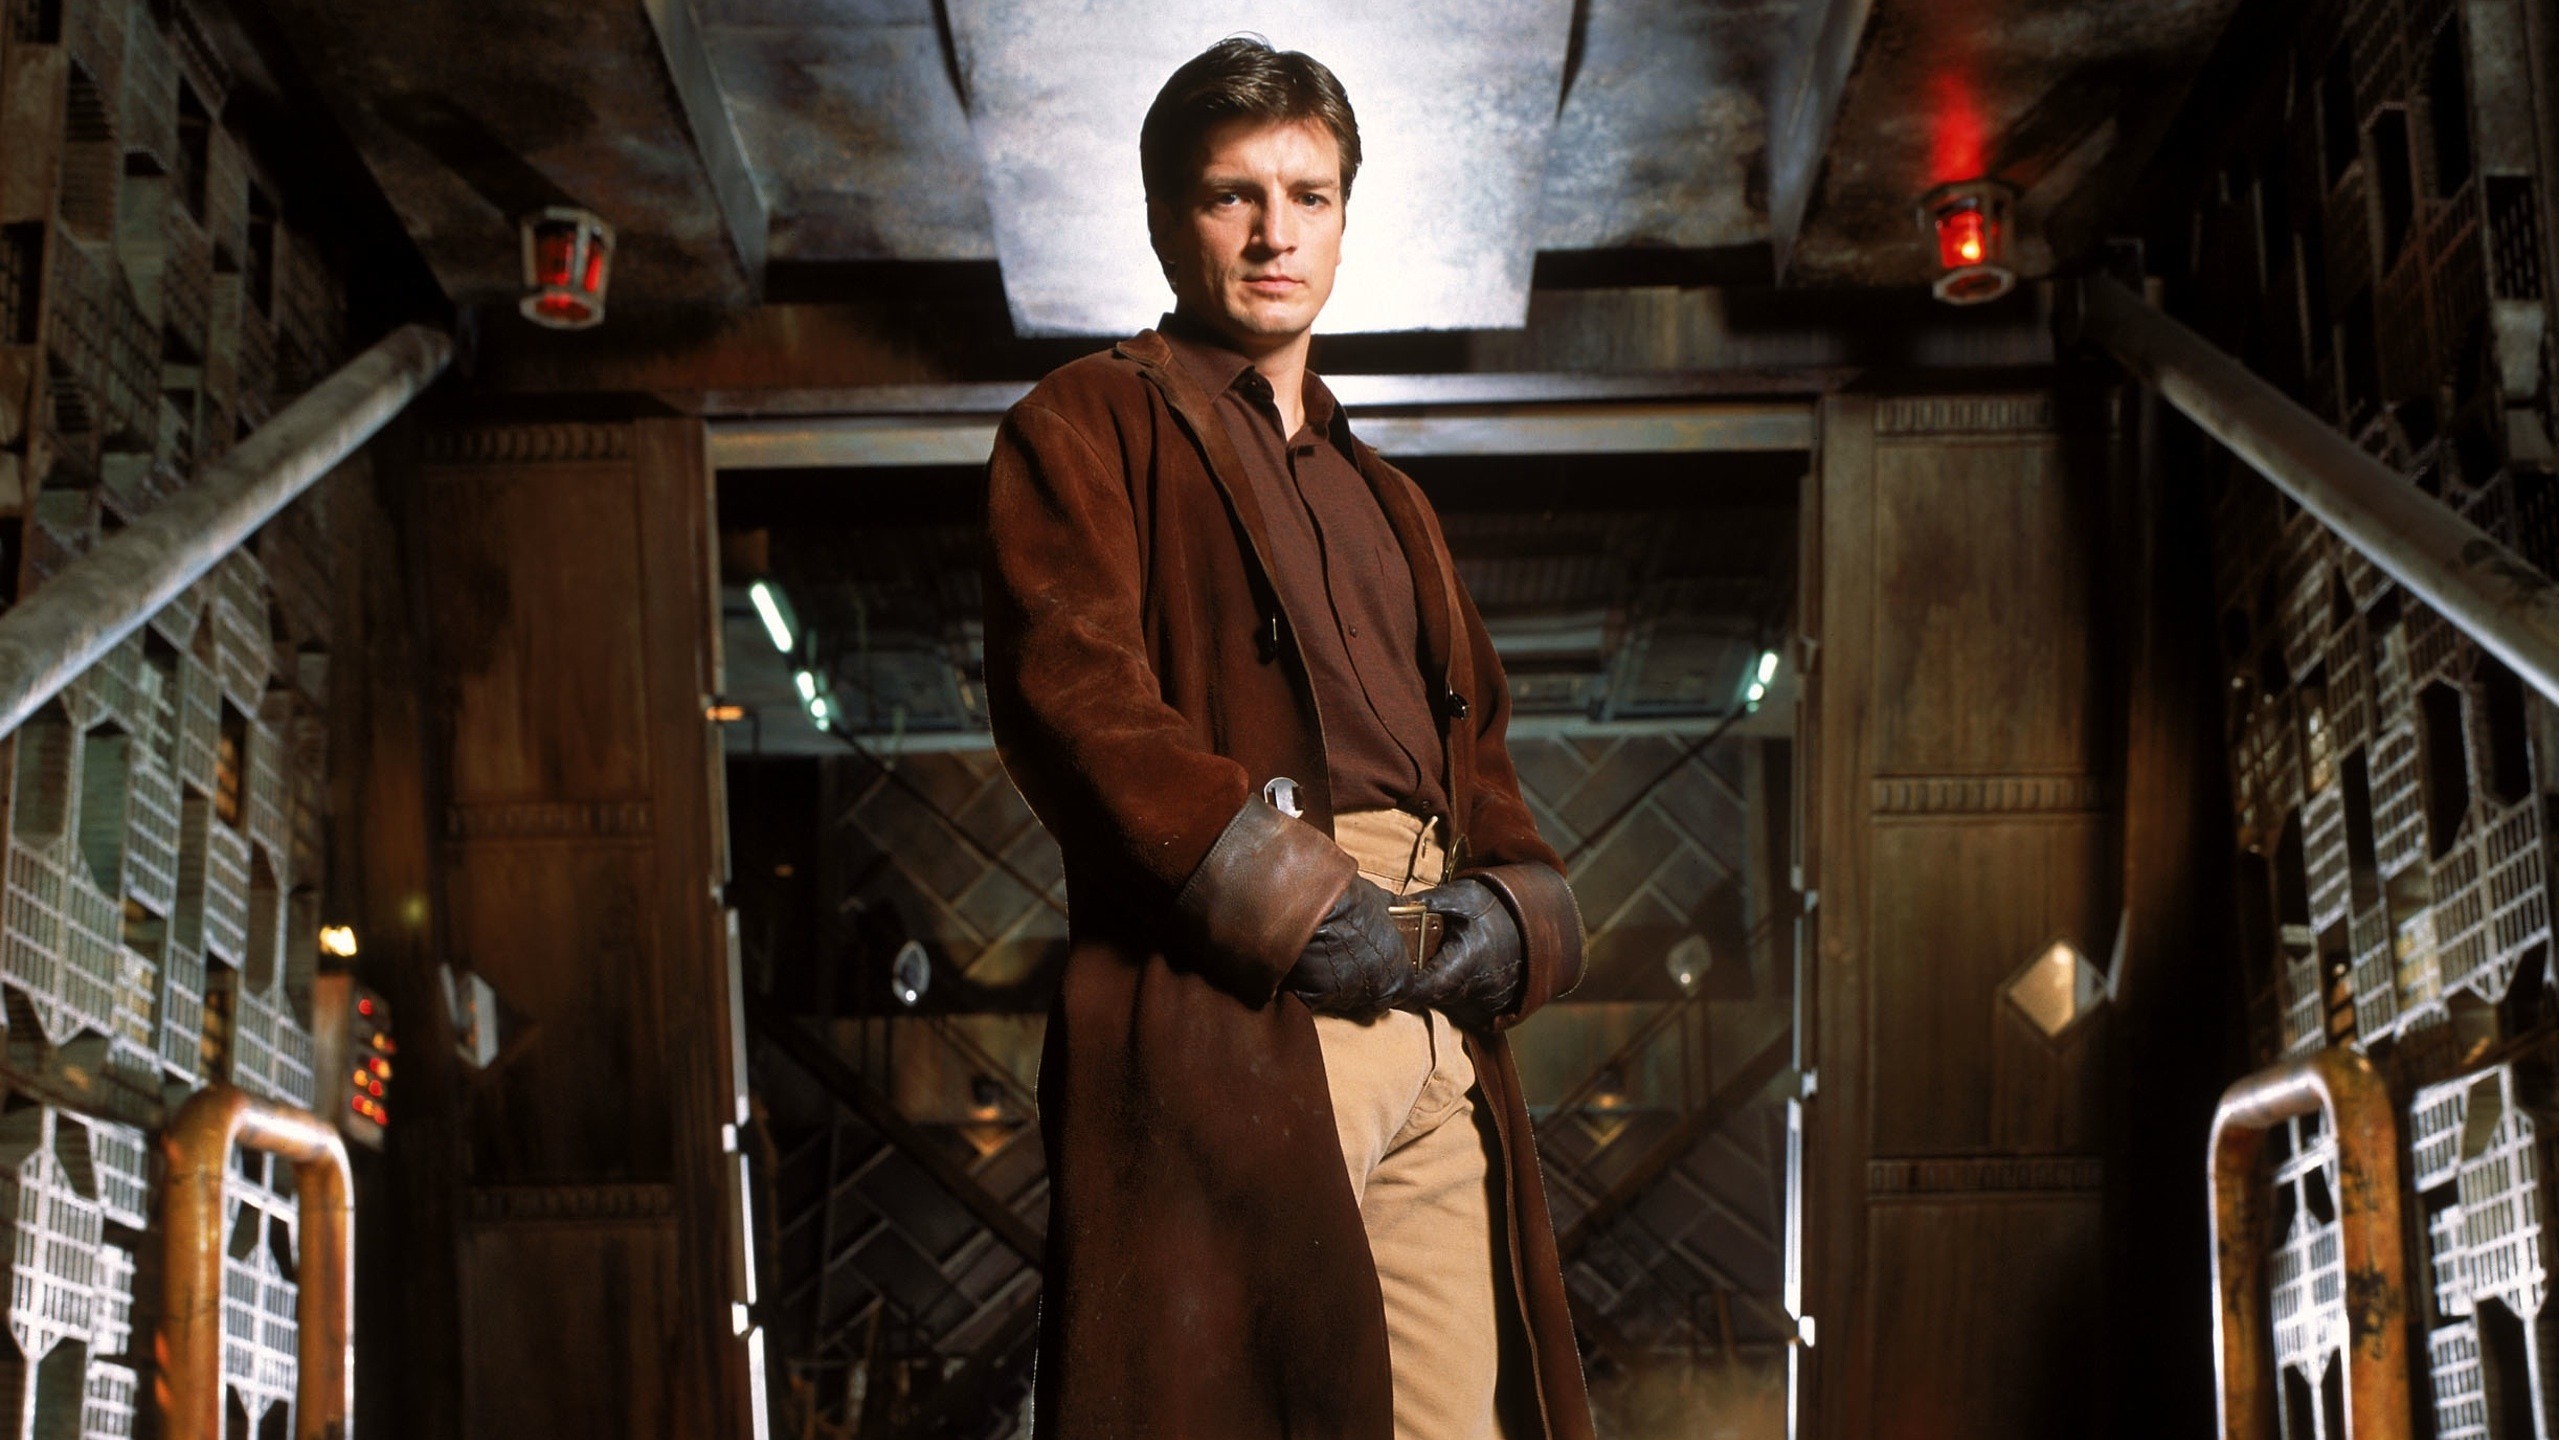 People 2560x1440 Firefly Nathan Fillion TV series Science Fiction Men science fiction men